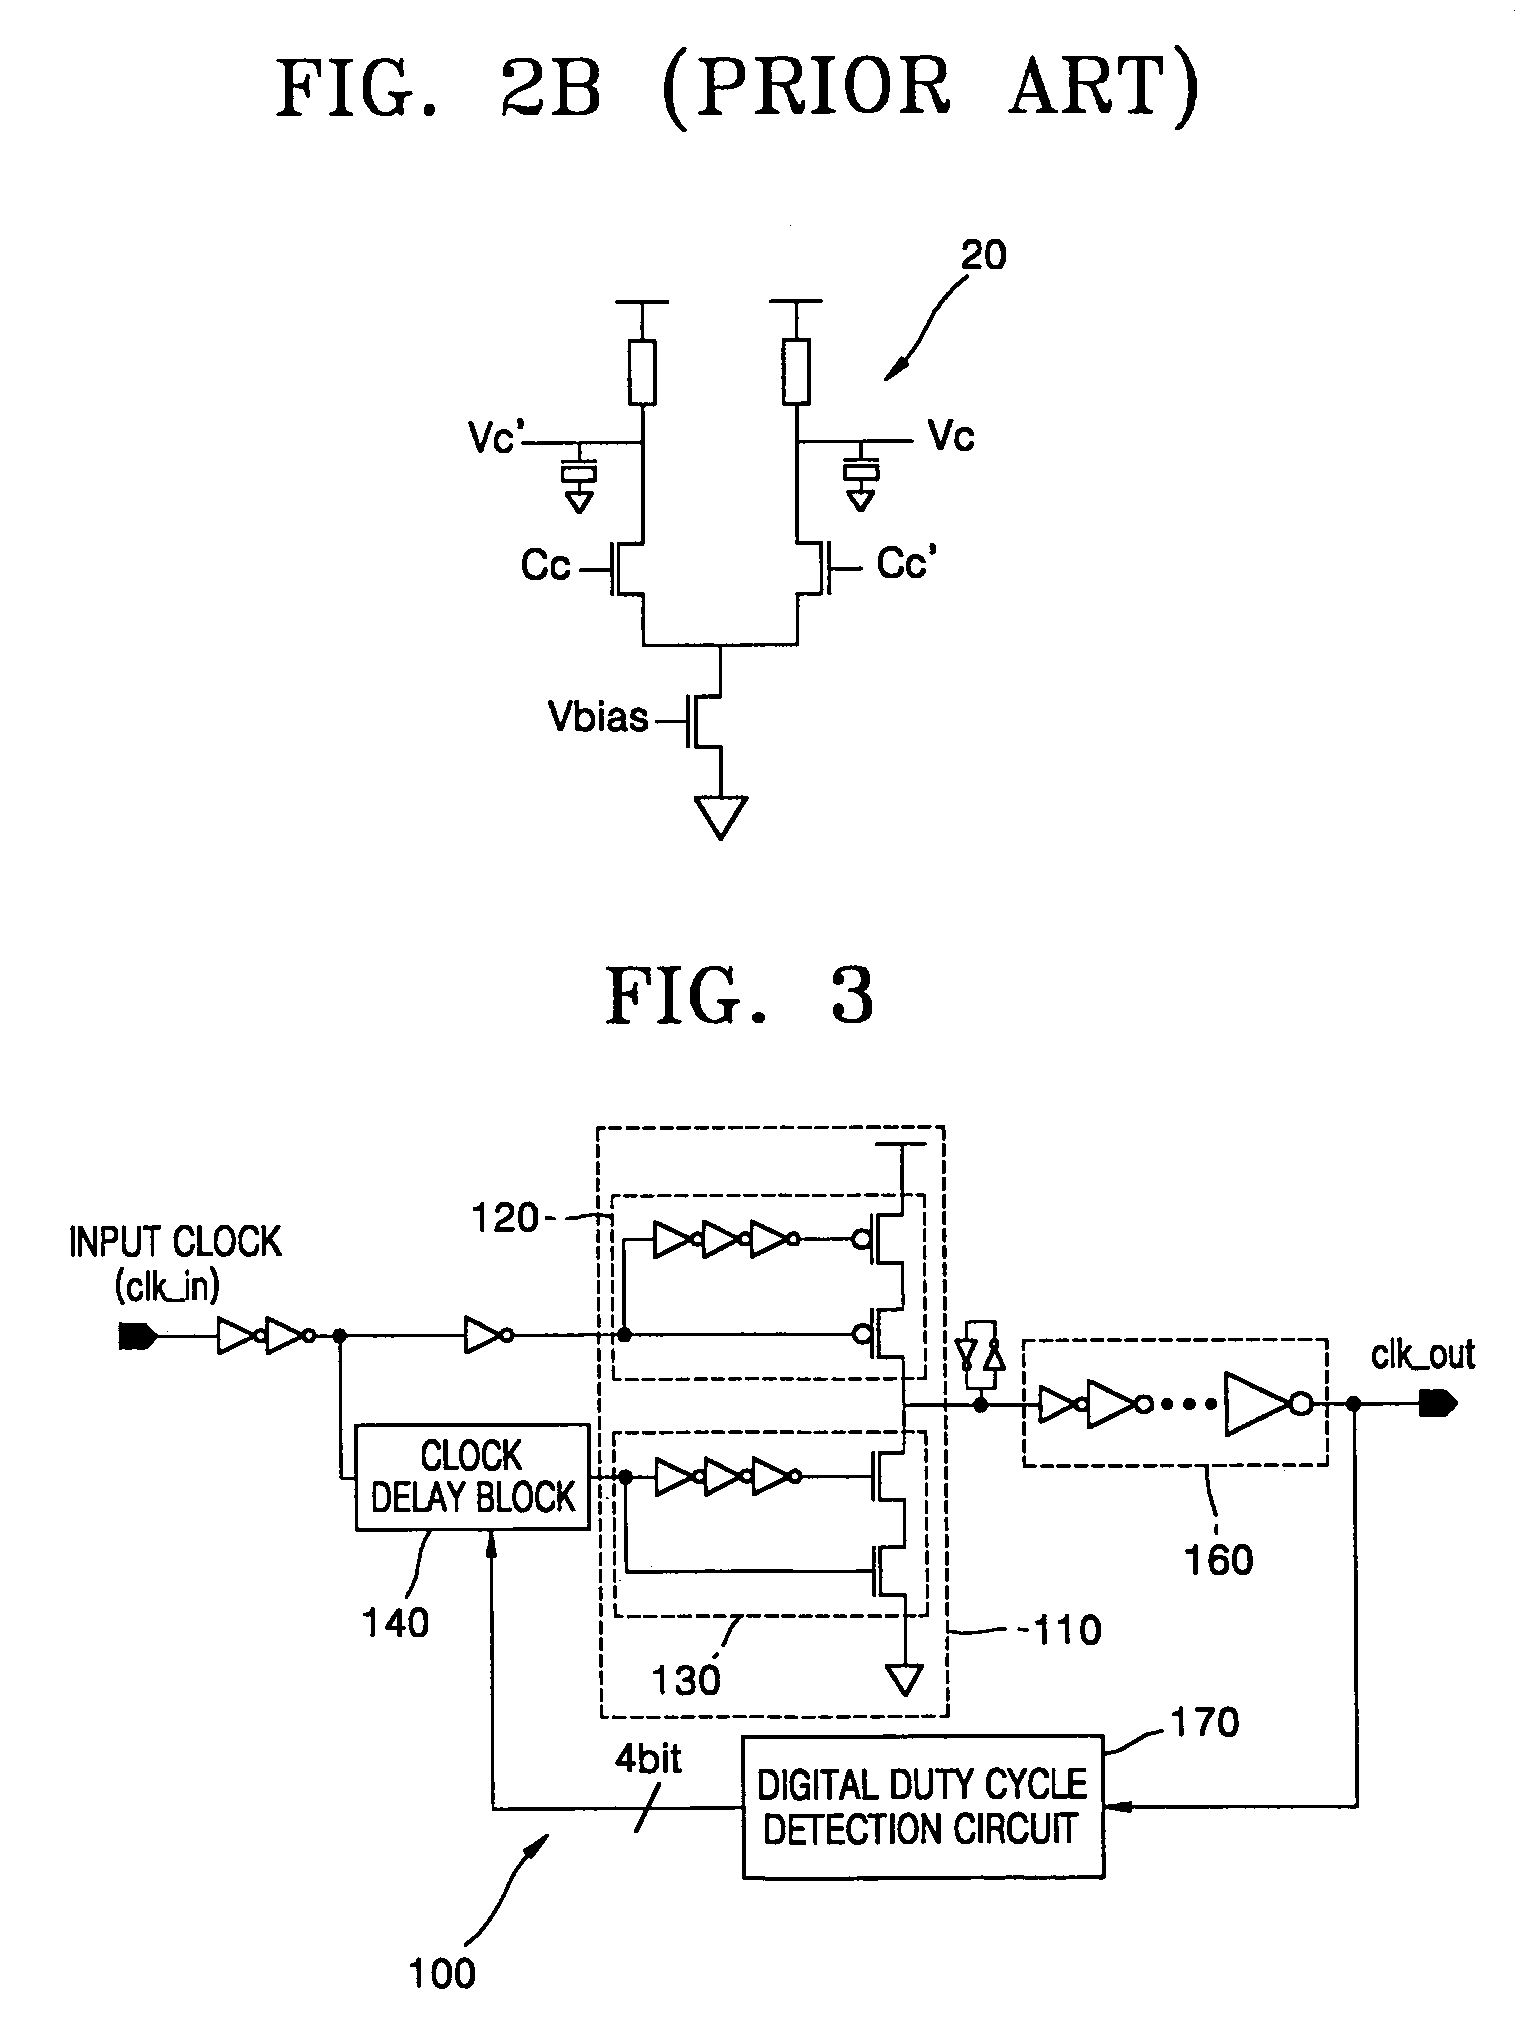 Digital duty cycle correction circuit and method for multi-phase clock